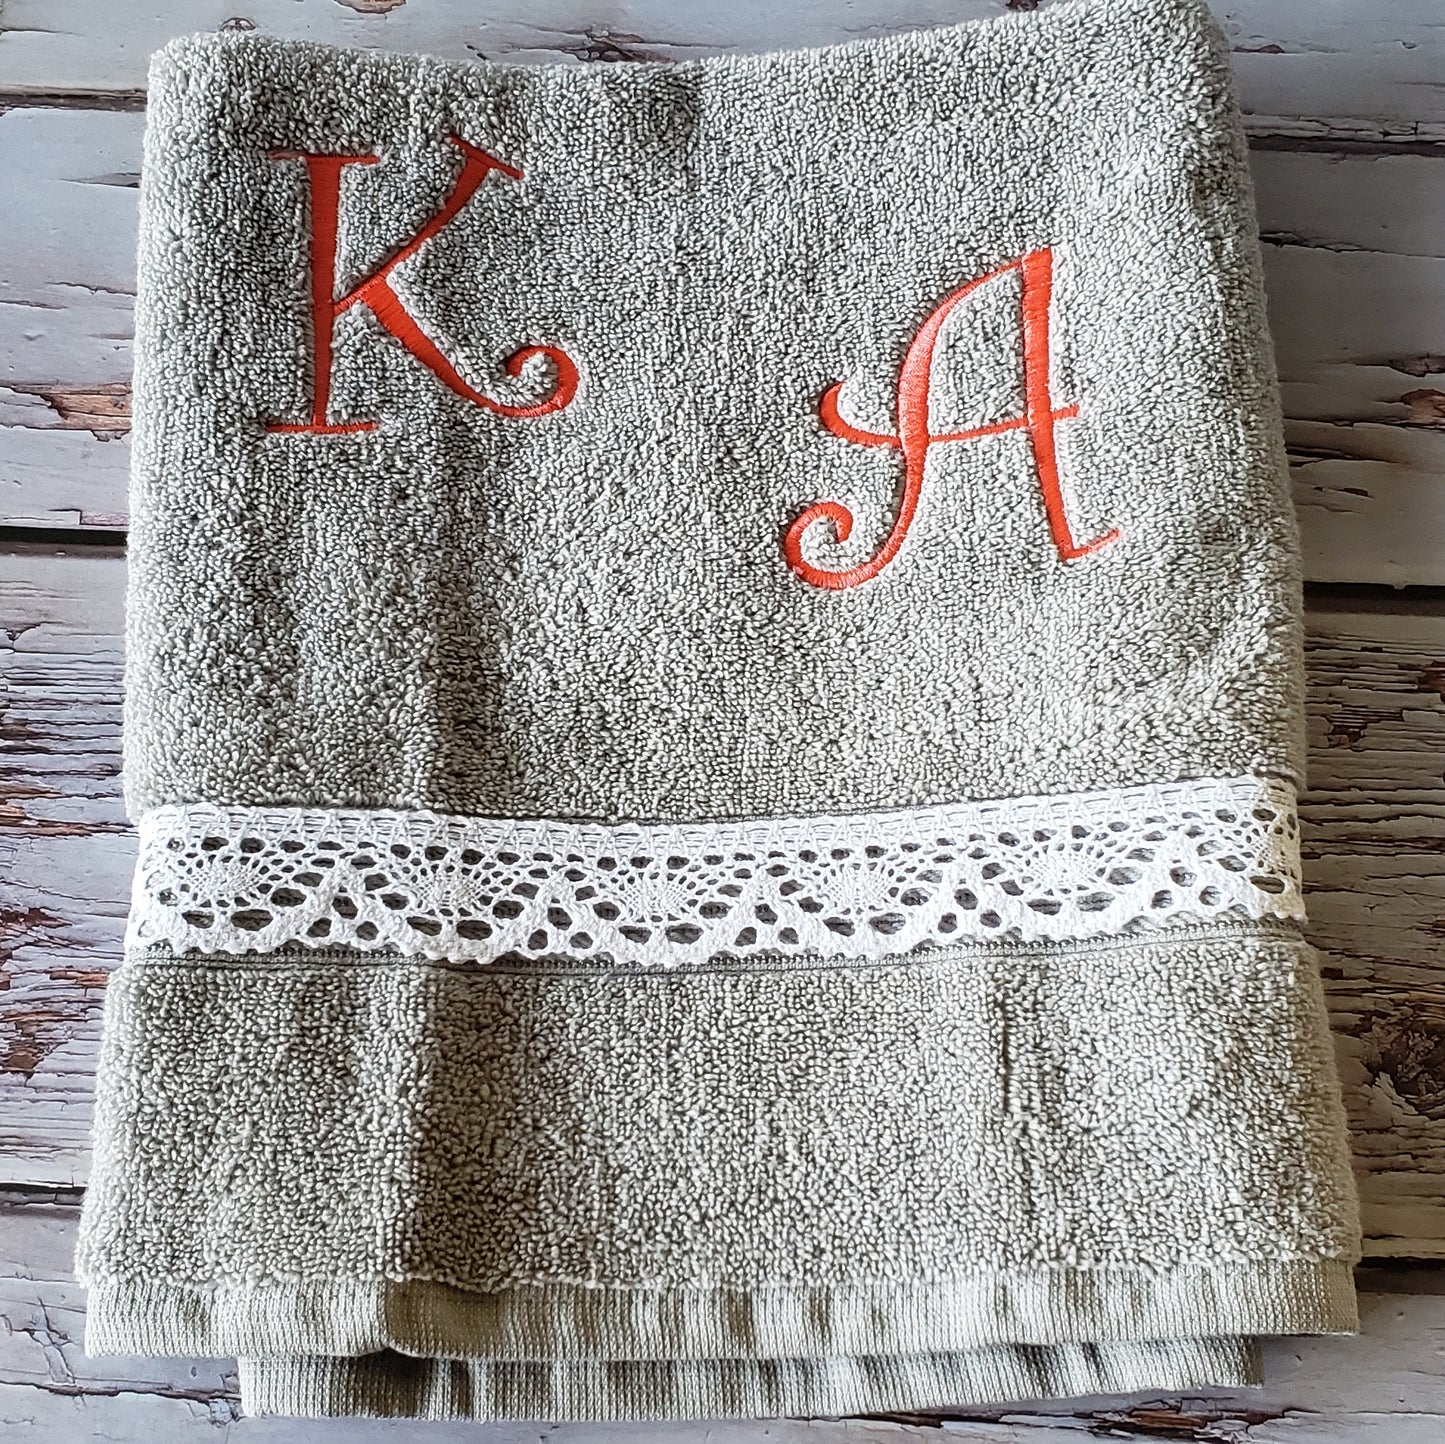 personalized hand towel